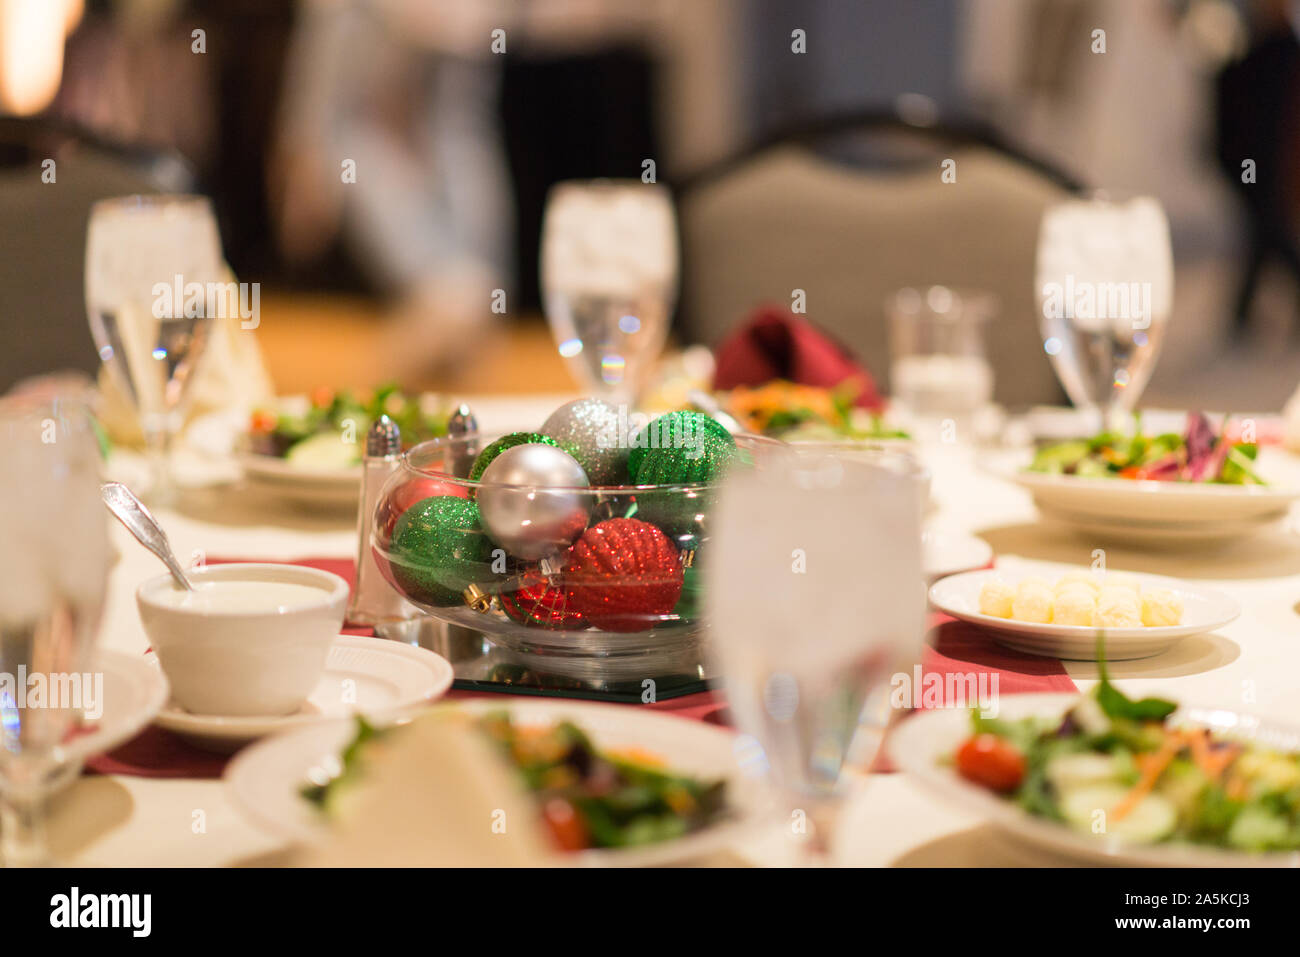 Christmas table setting with salads and ornament centerpiece Stock Photo